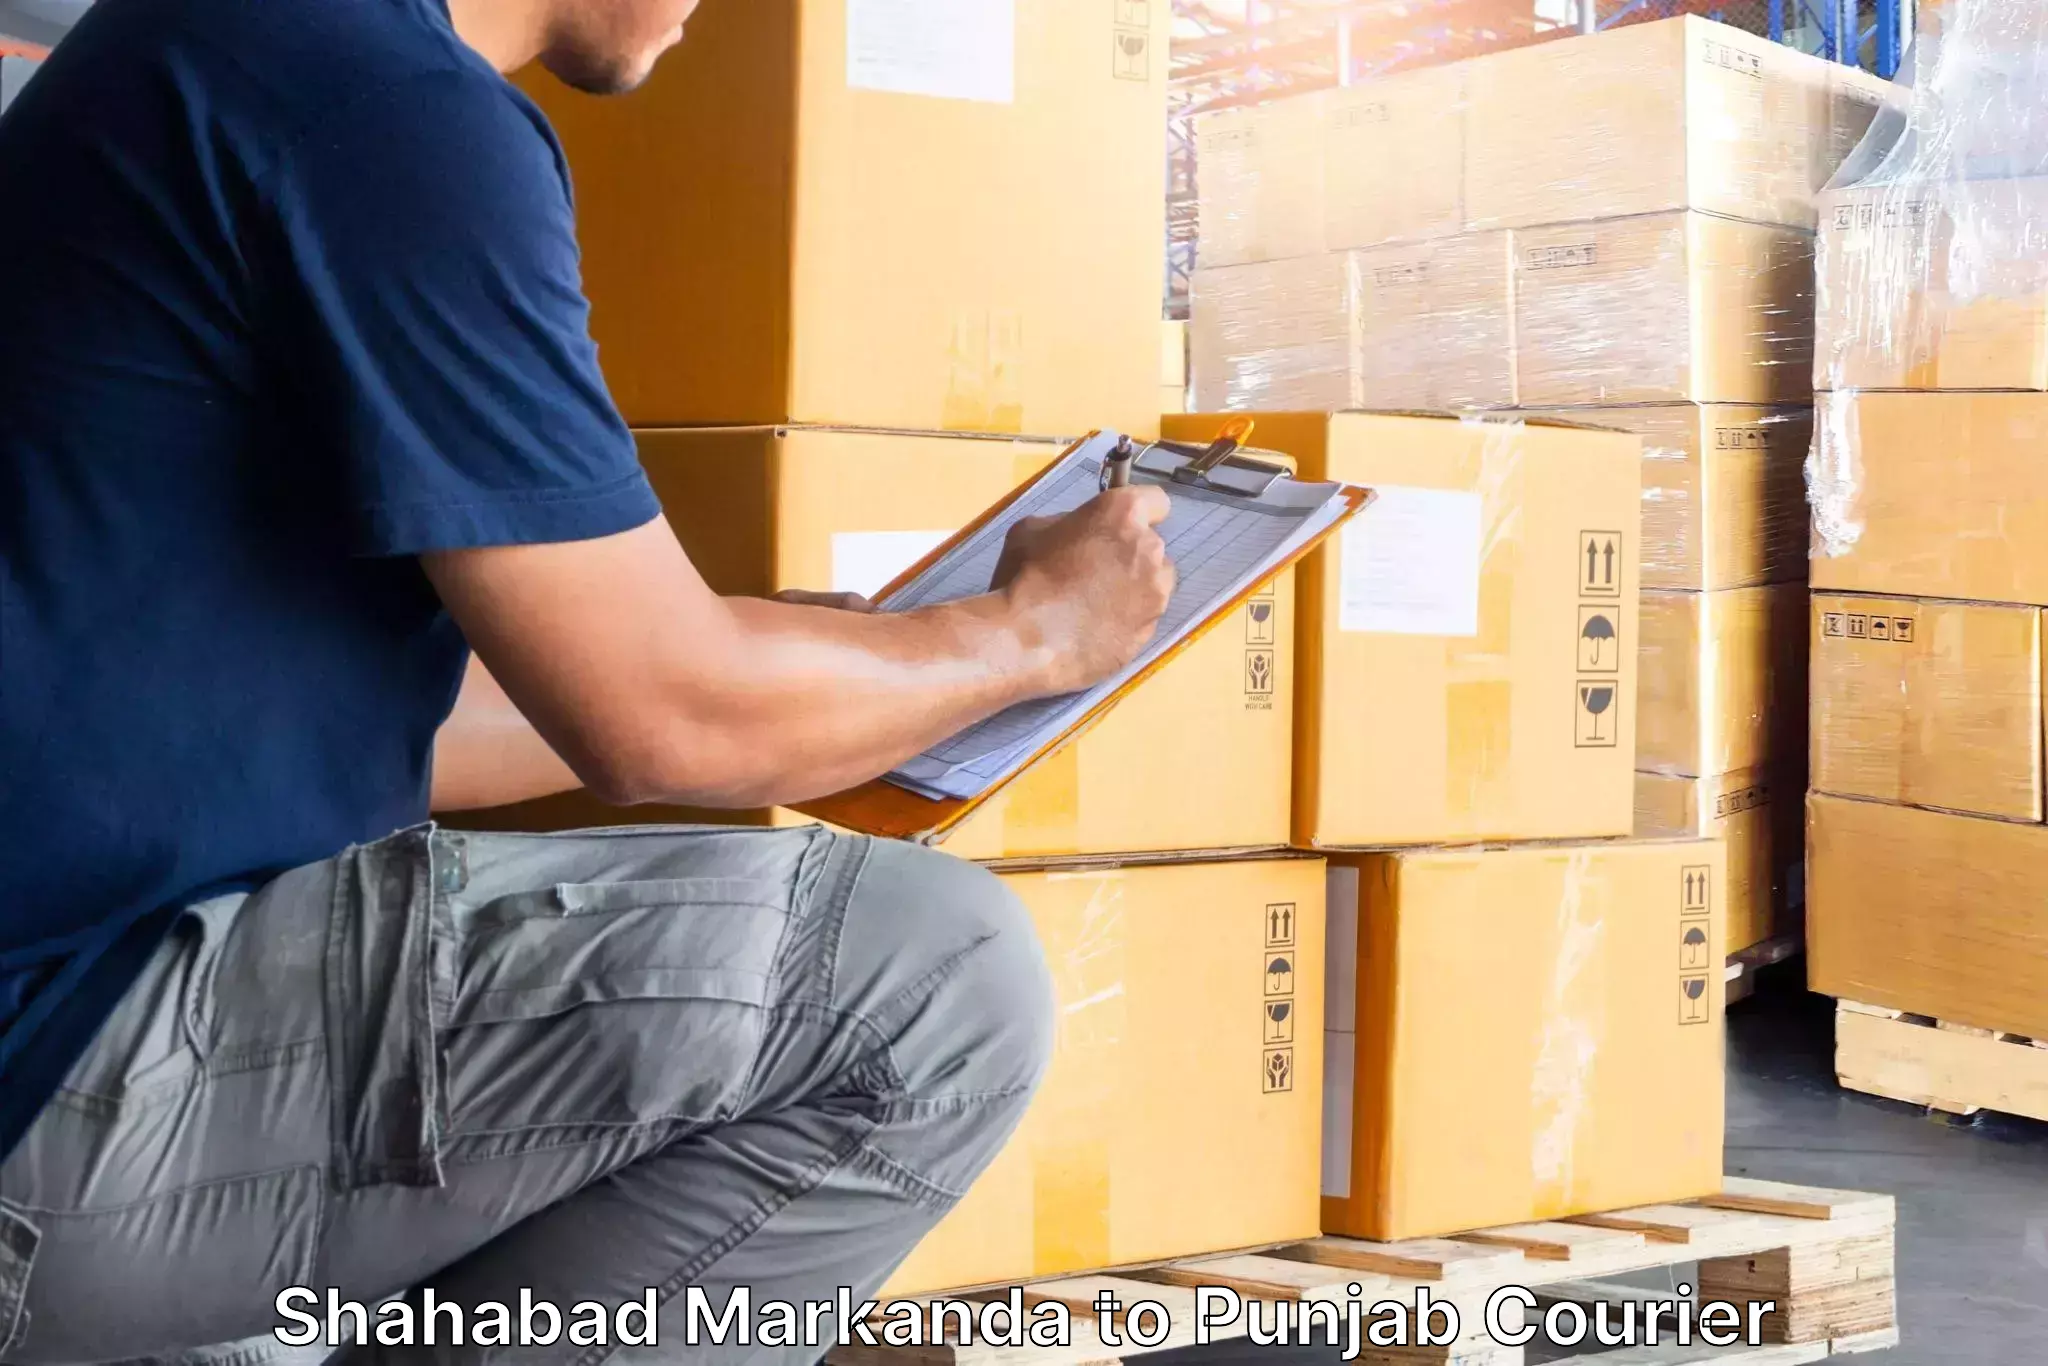 Household goods transport service Shahabad Markanda to Thapar Institute of Engineering and Technology Patiala